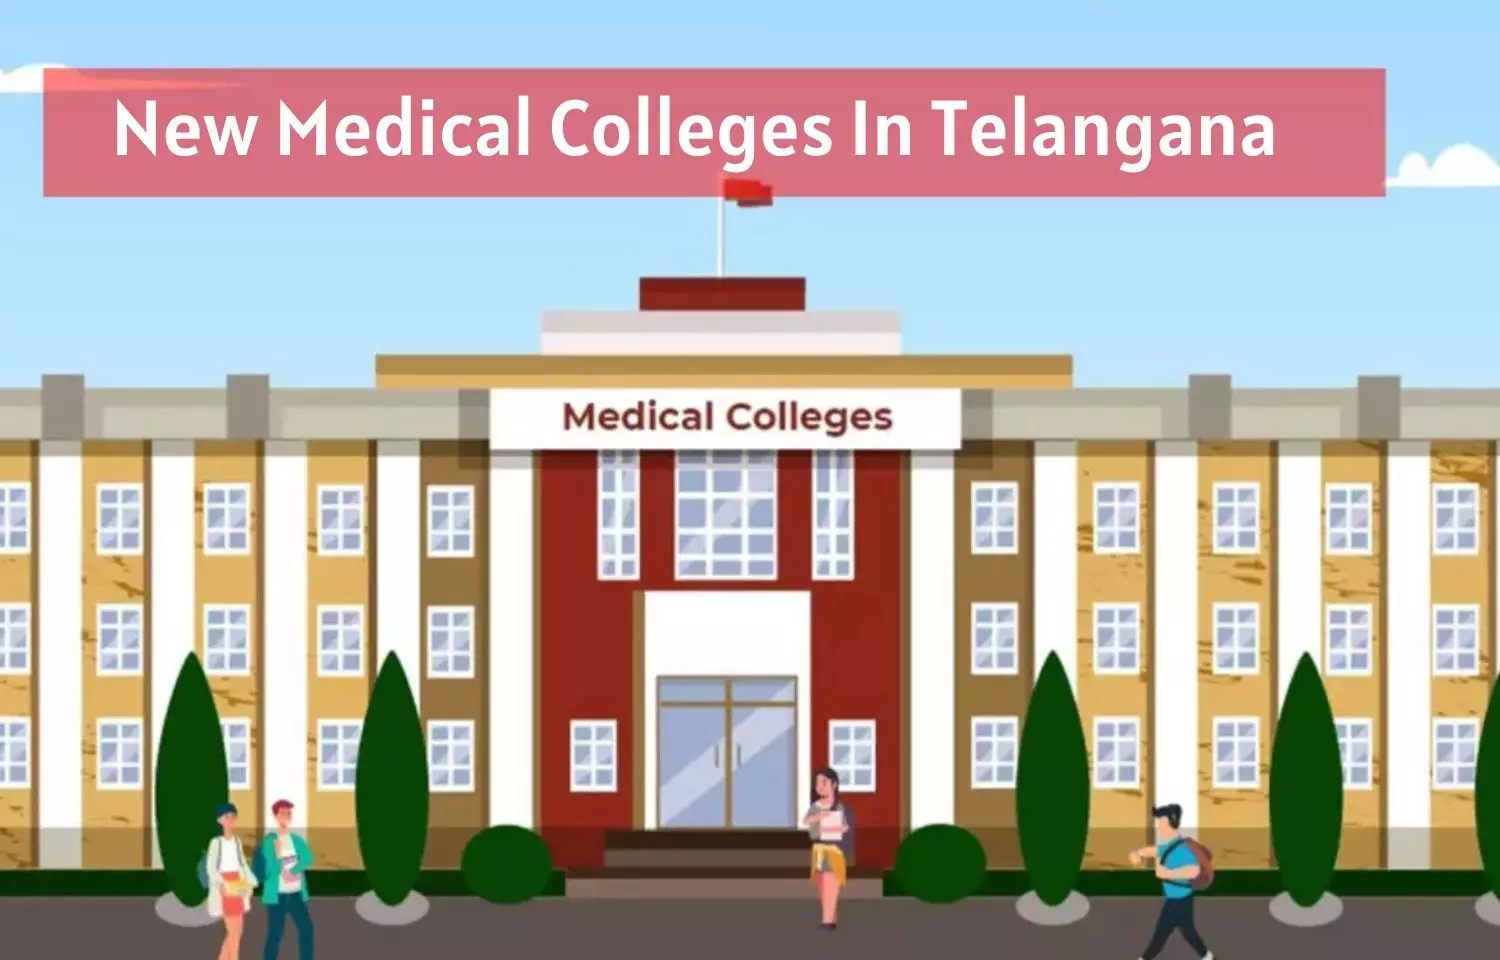 Telangana to have 29 more medical colleges: Minister for IT and Industries K T Rama Rao